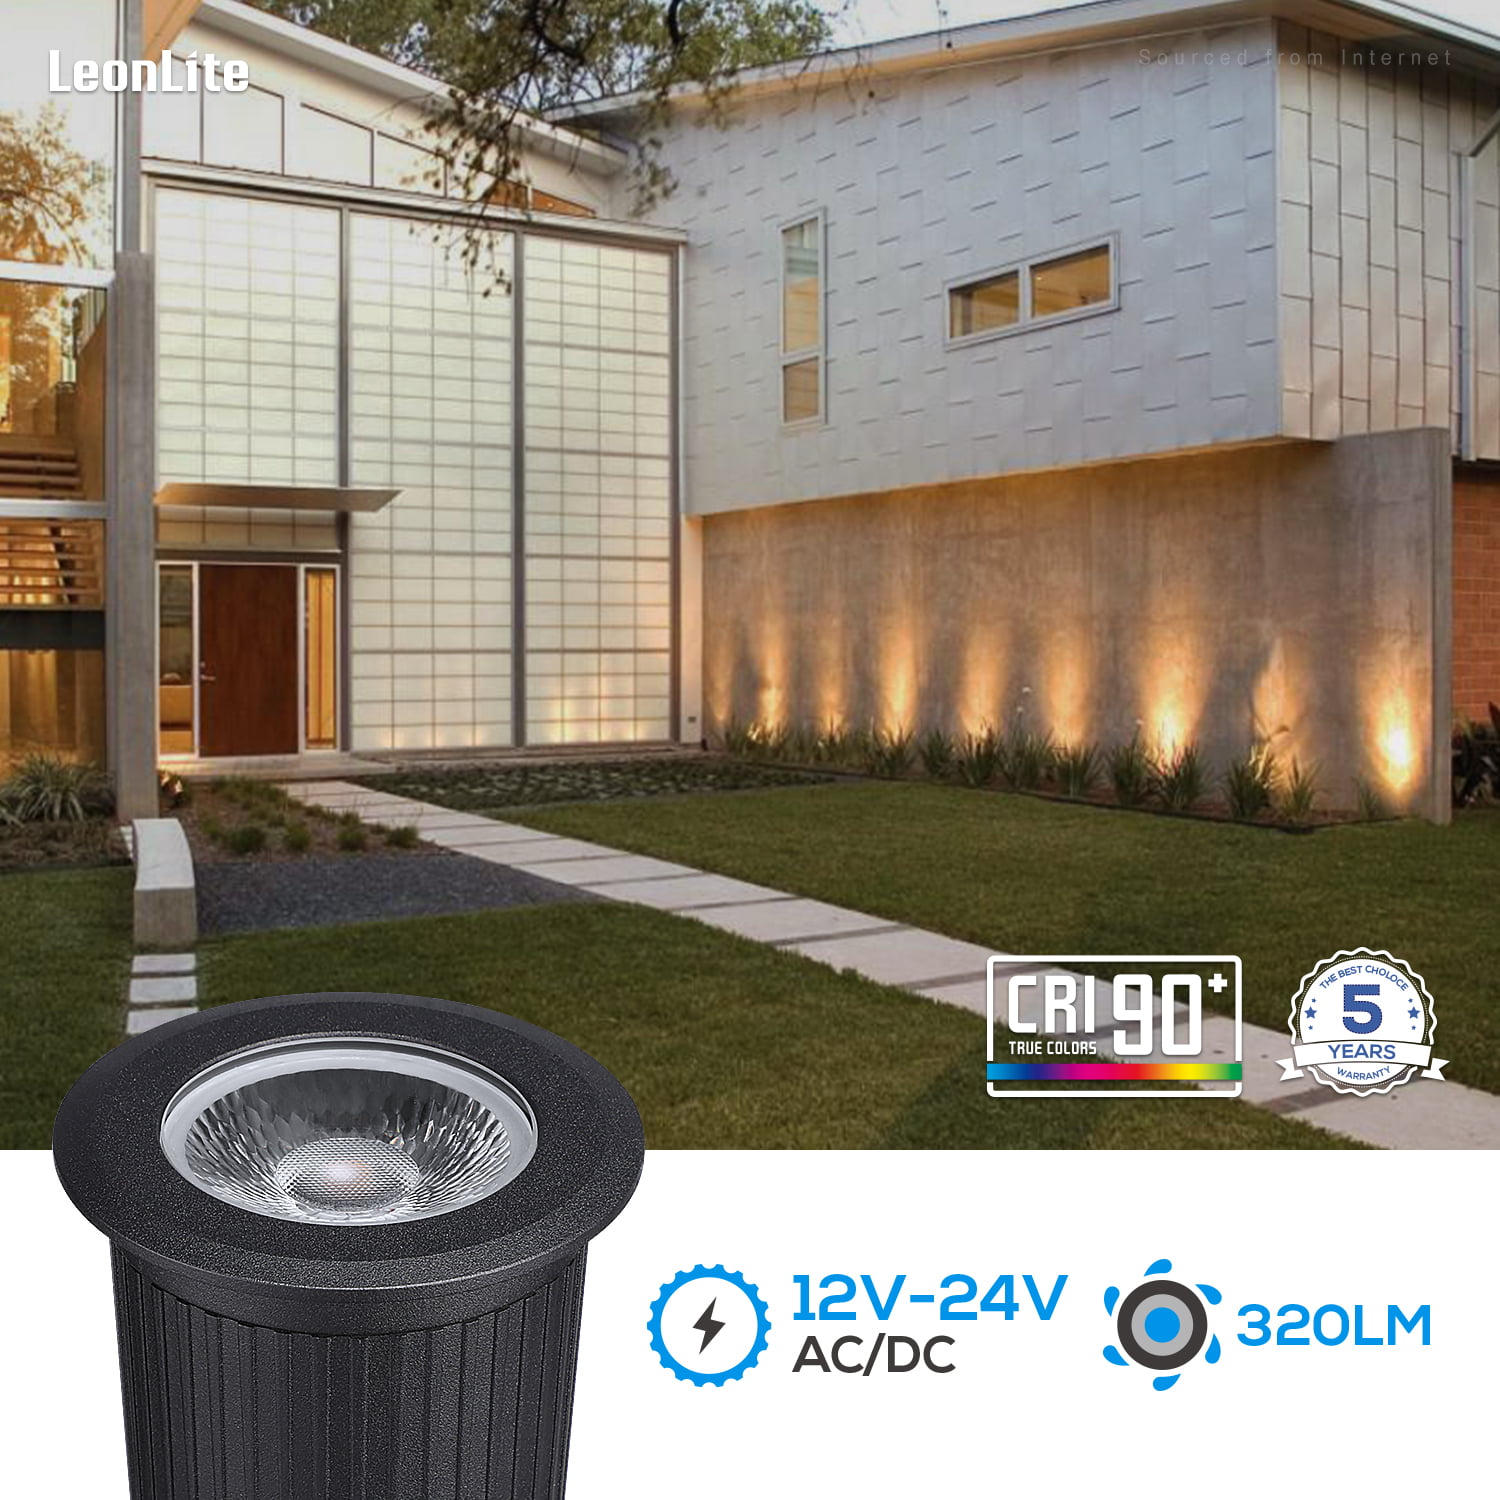 LEONLITE 3W In-Ground Landscape Lighting, Low Voltage 12-24V LED Outdoor  Well Light, Linkable Pathway Lights, IP67 Waterproof Deck light, 3000K Warm  White, for Yard, Garden, Patio, Pack of